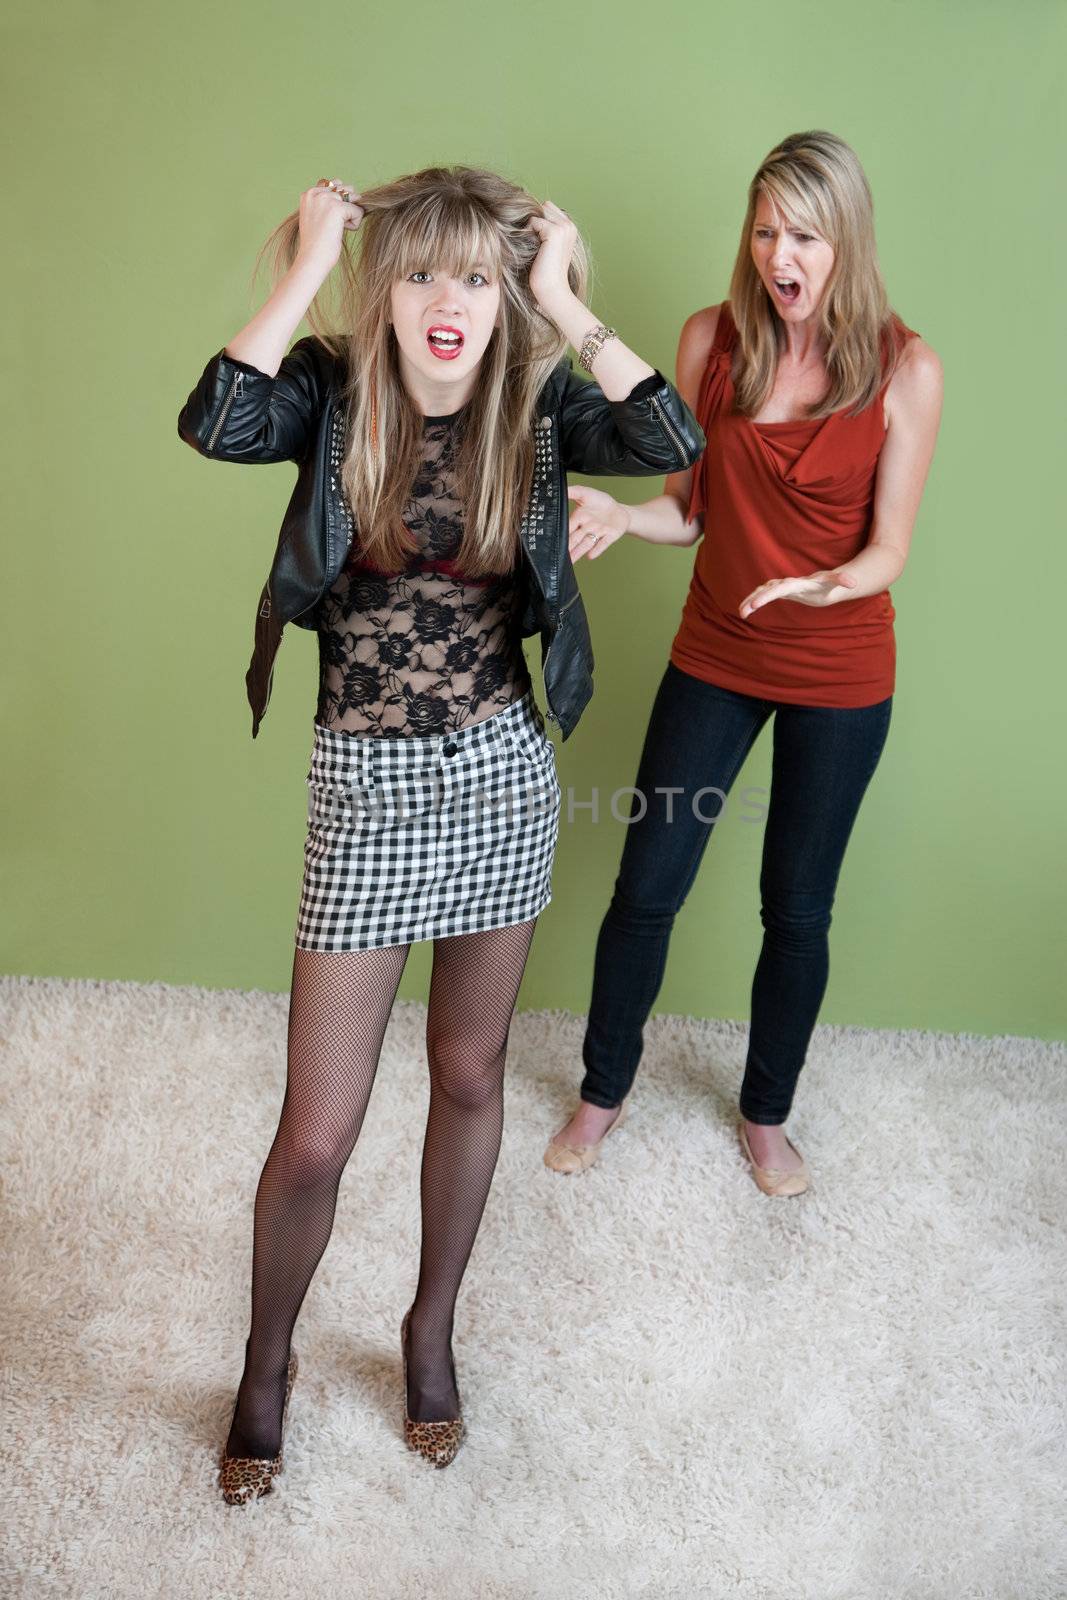 Unhappy mom  with daughter in provocative clothing